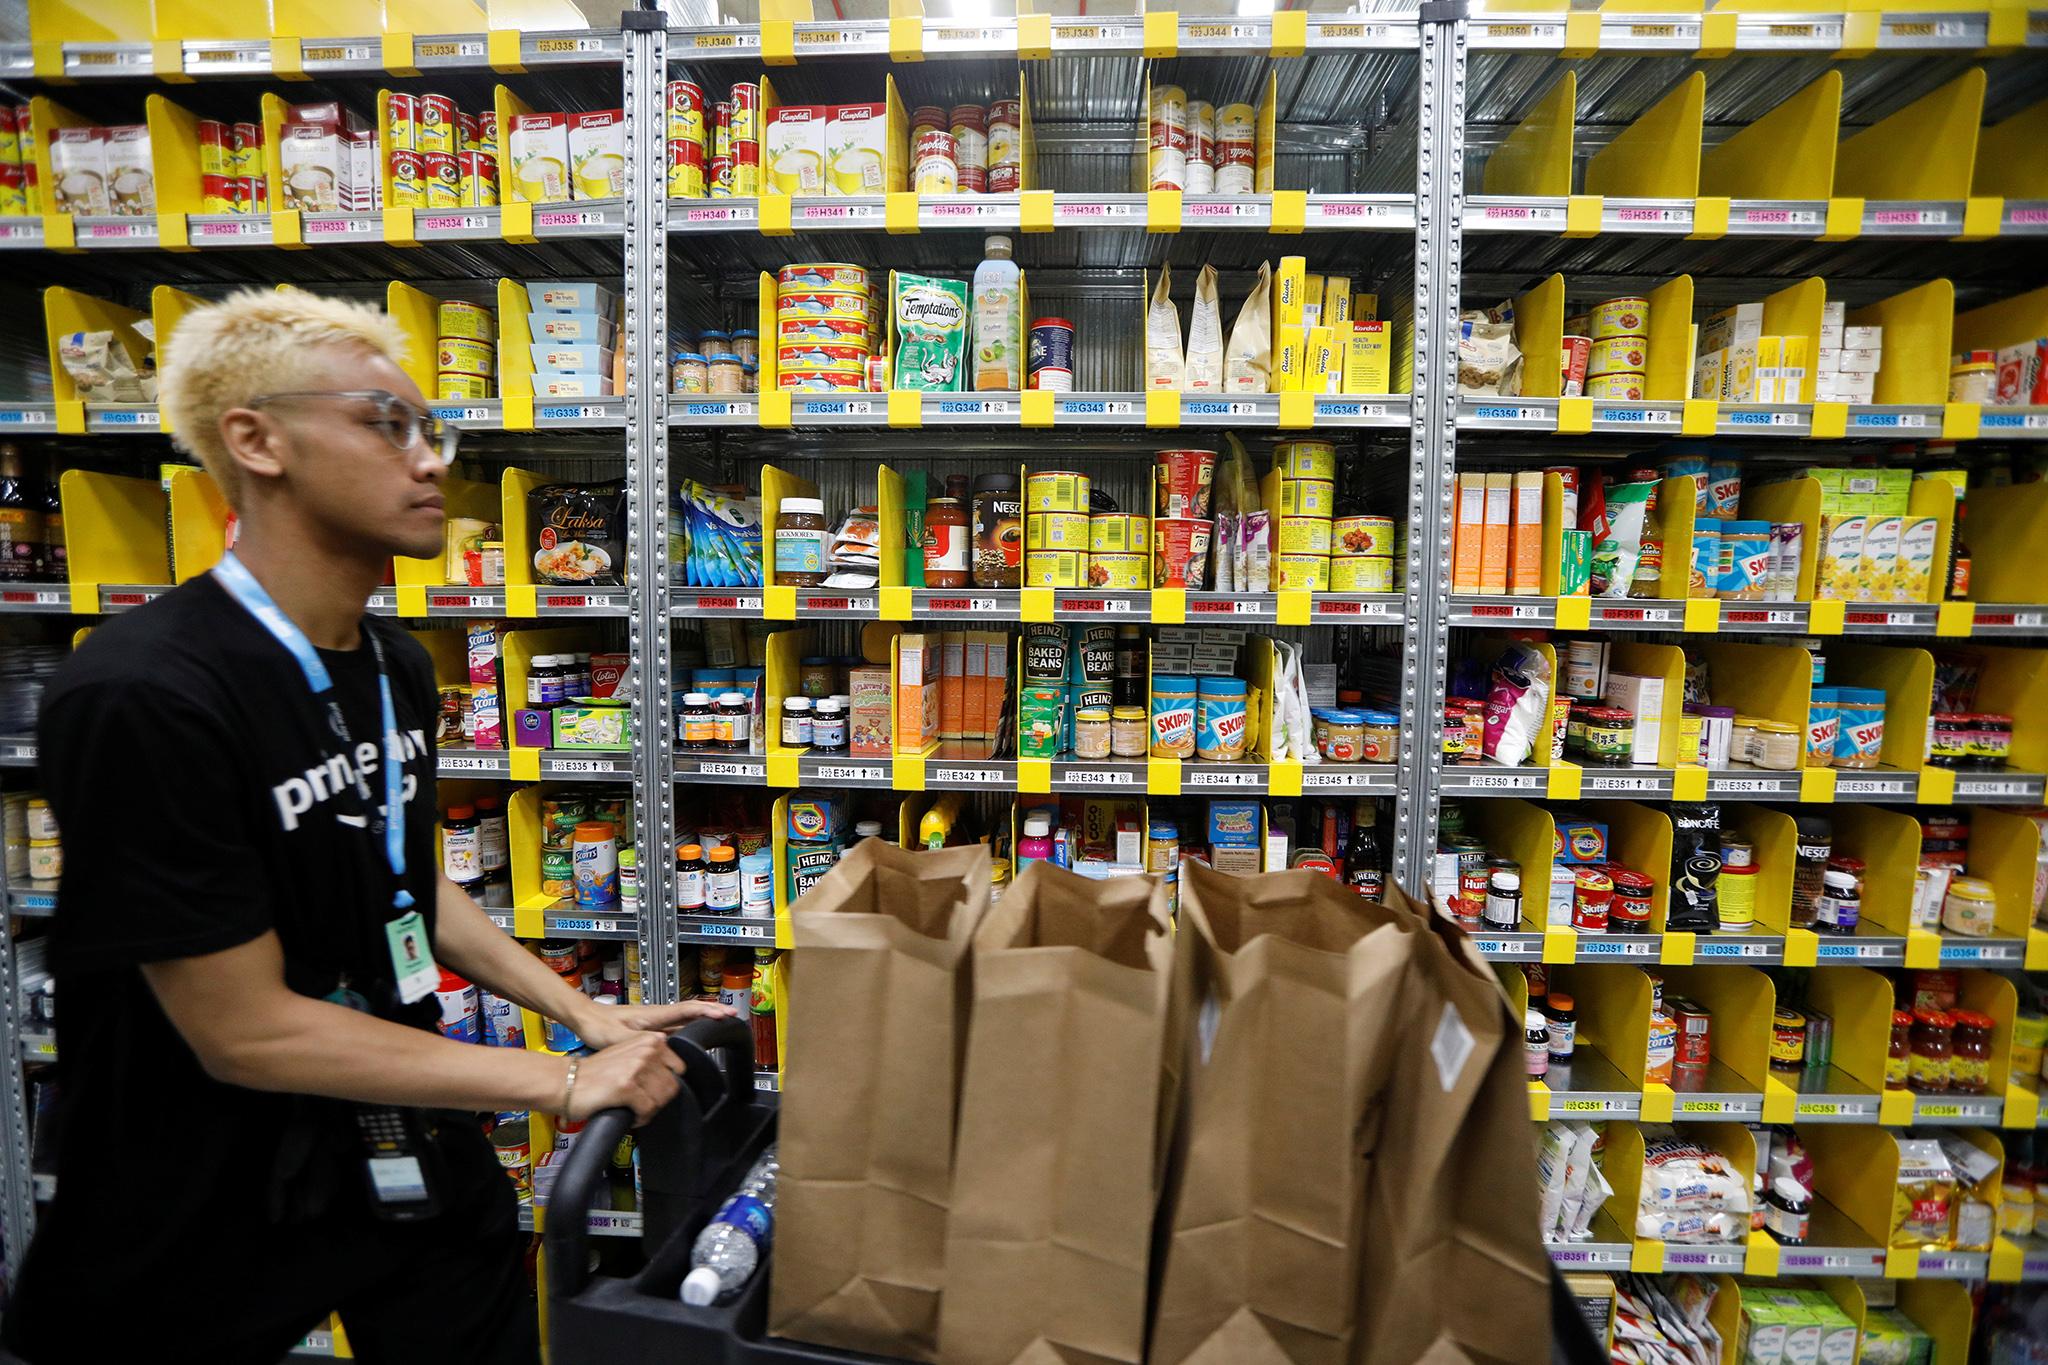 Amazon announced a two-hour delivery service available in Singapore